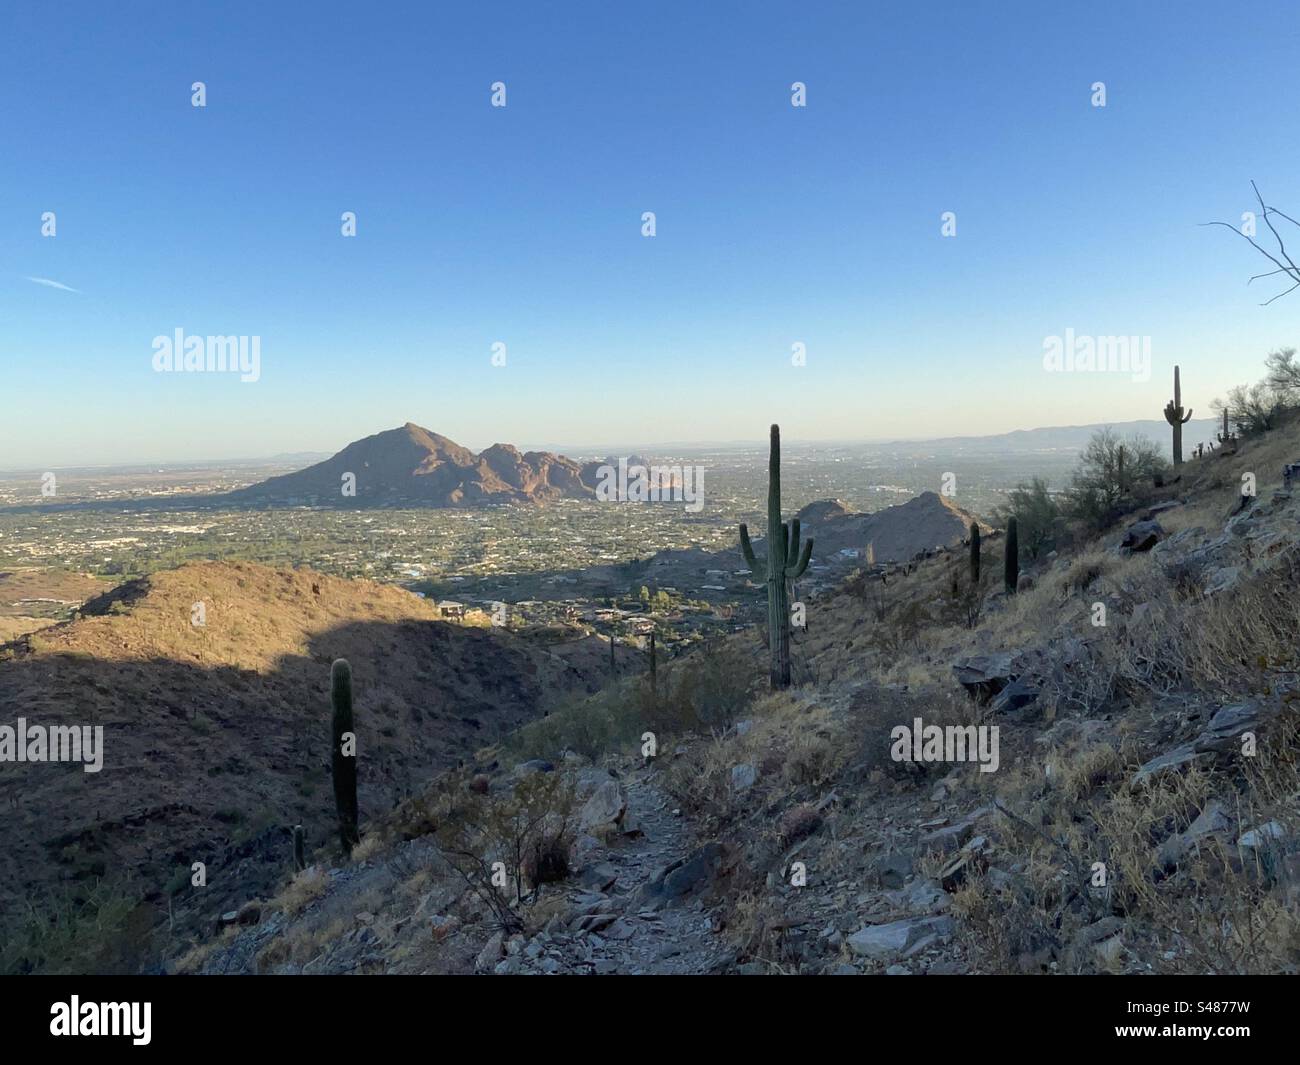 Camelback mountain with setting sun glow, view from hiking trail, banded blue and orange sunset, saguaros, Phoenix Mountains Preserve, Arizona Stock Photo